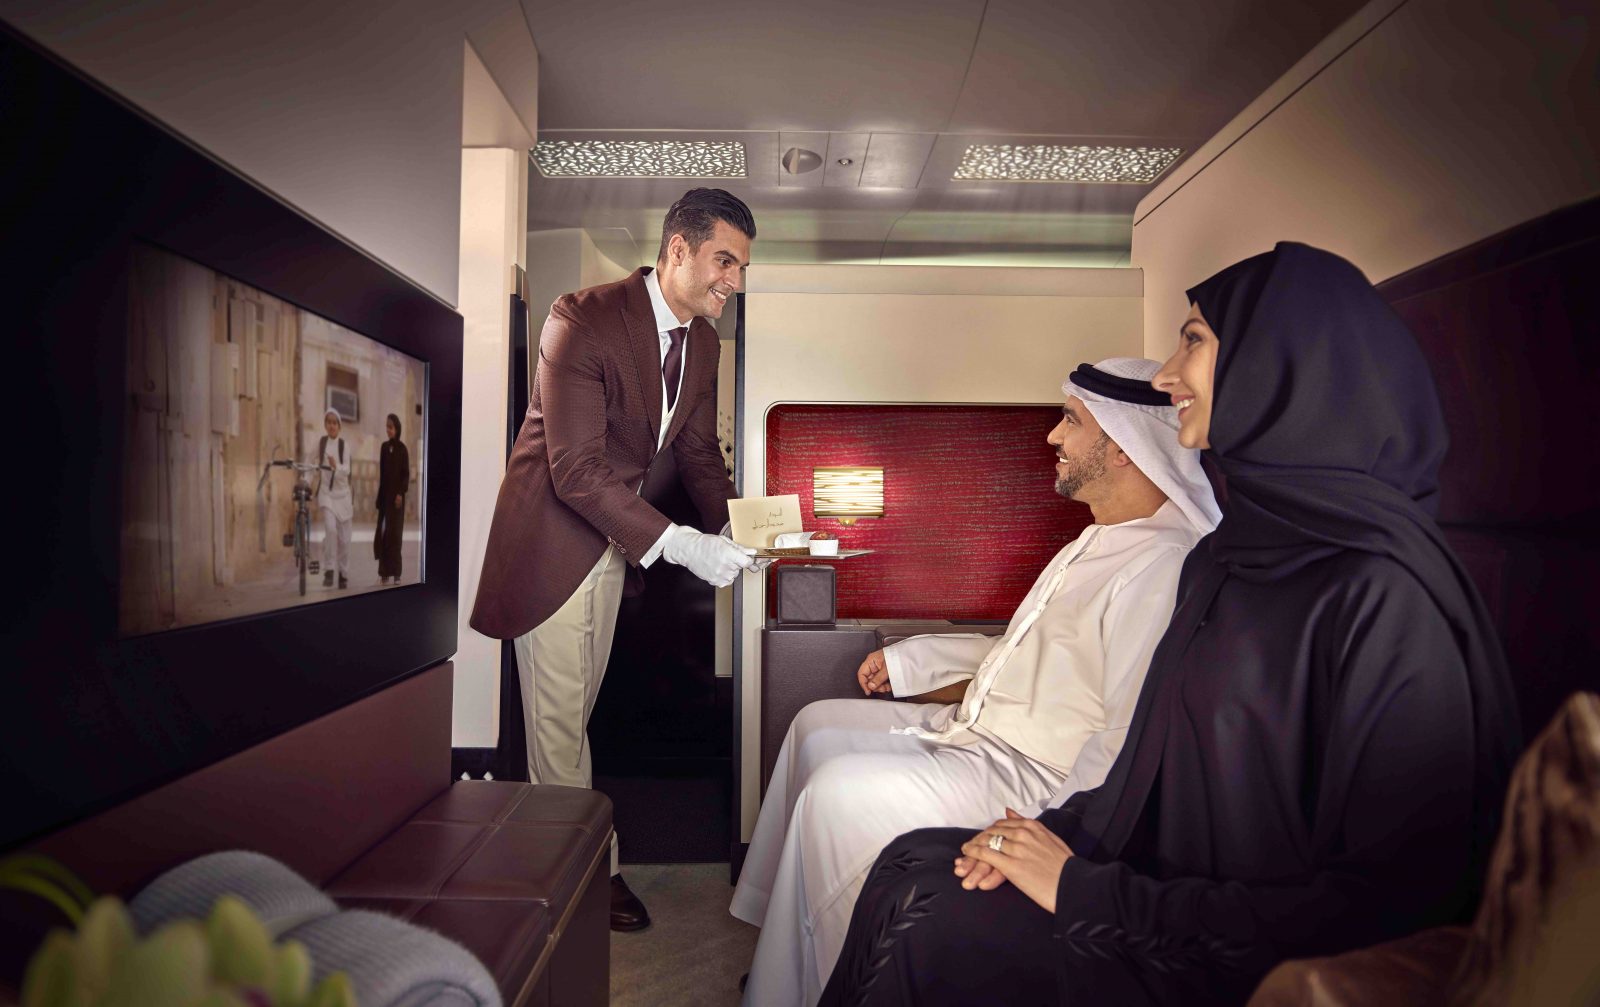 Etihad Admits its Brand Was Too "Exclusive" - Is Now Aiming To Be "Inclusive"